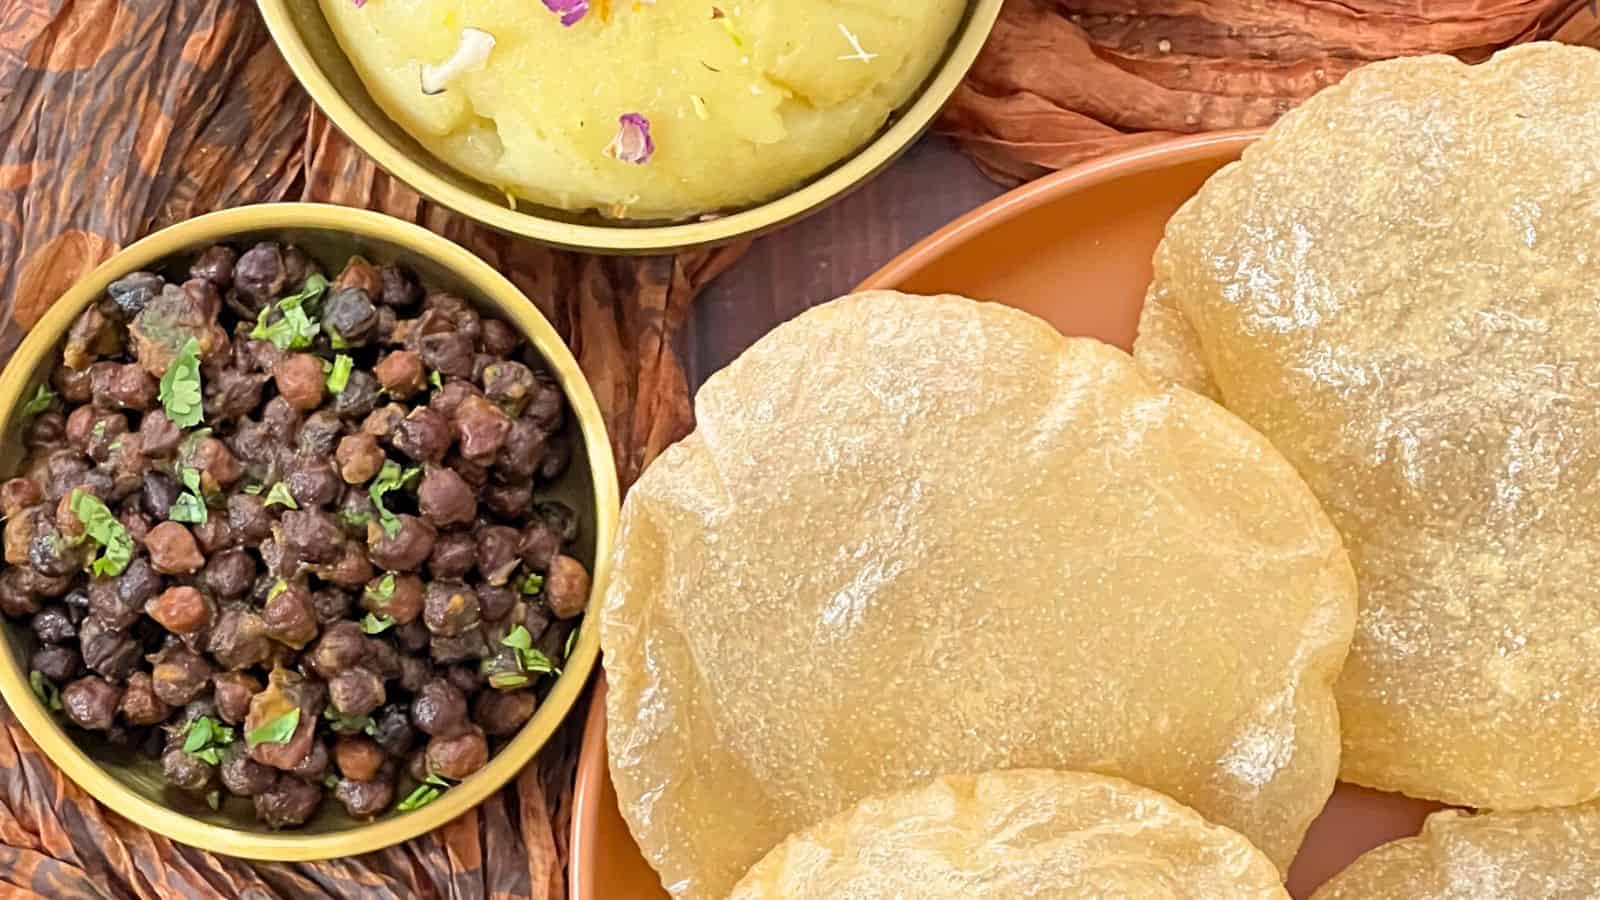 Image of Halwa Puri (Brunch/Chana) an indian meal featuring puris (fried bread), a bowl of black chickpeas, and mashed potatoes garnished with herbs.